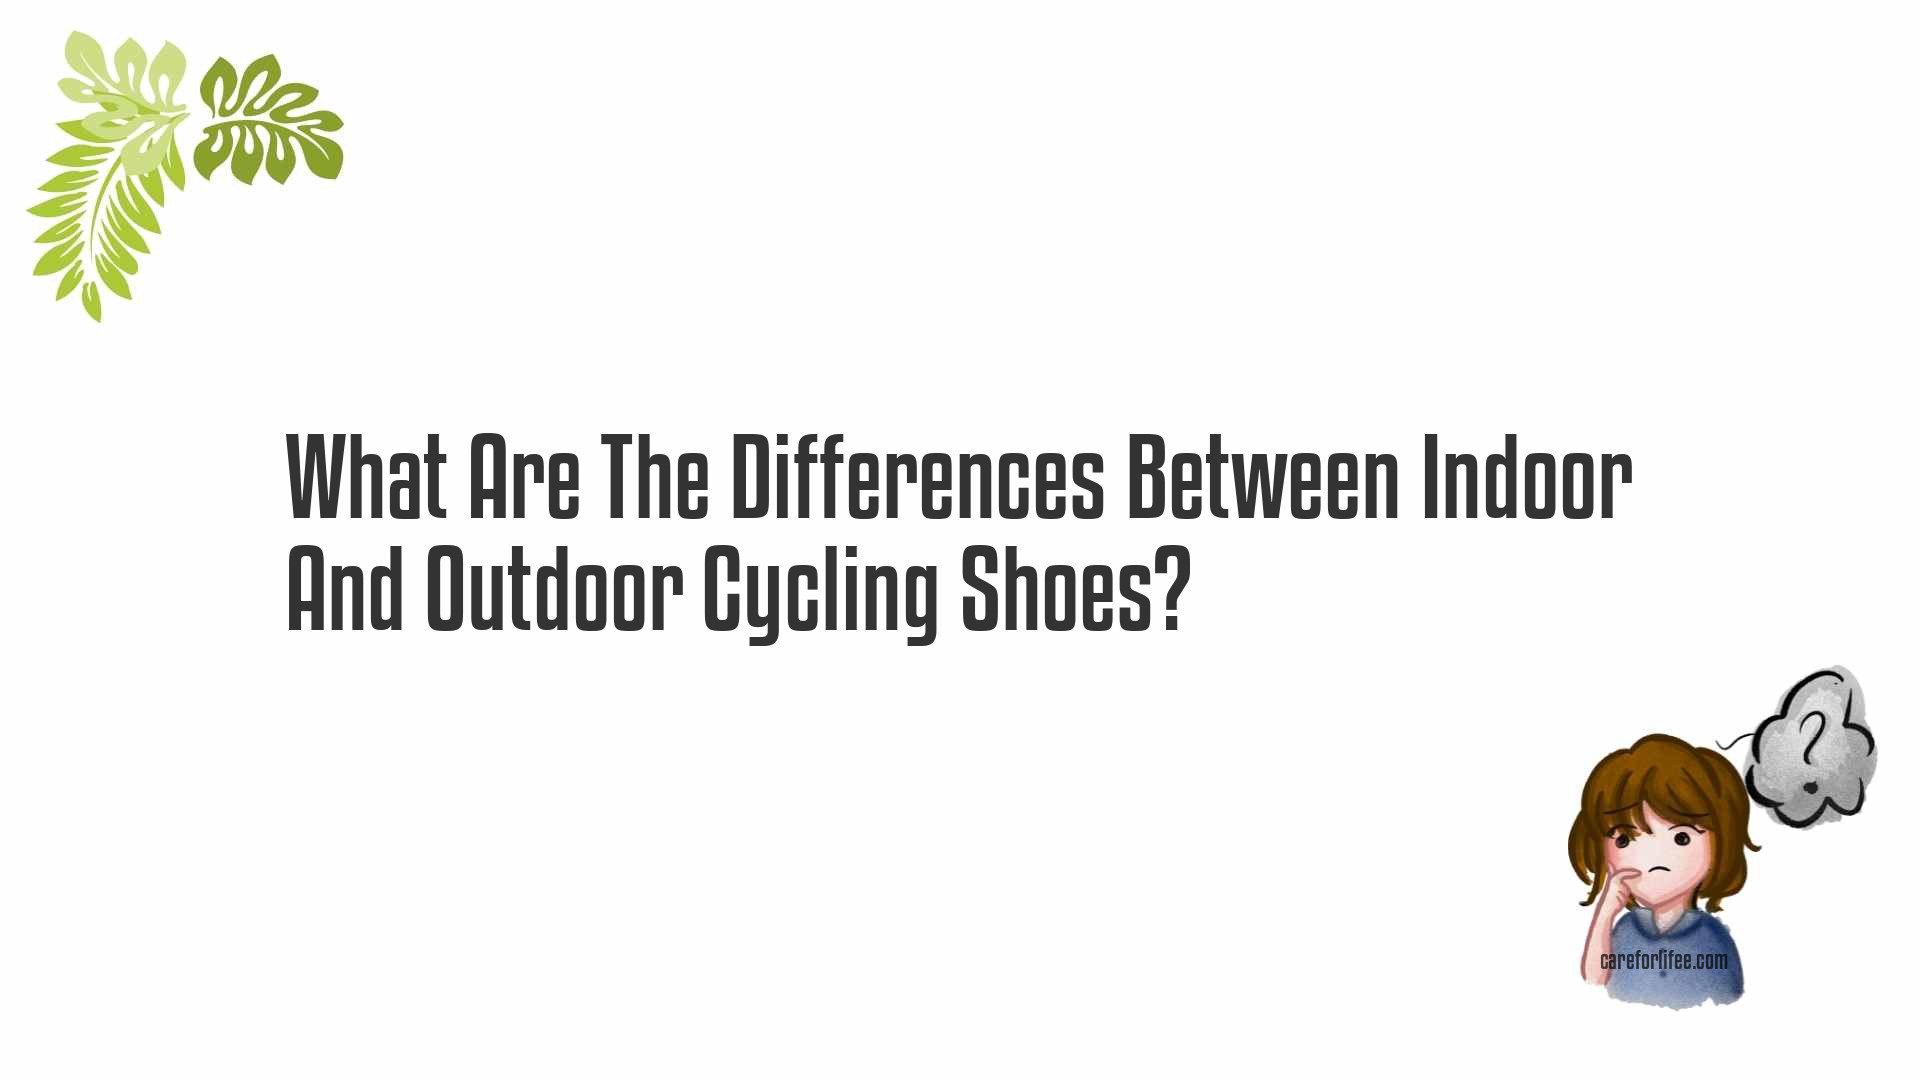 What Are The Differences Between Indoor And Outdoor Cycling Shoes?